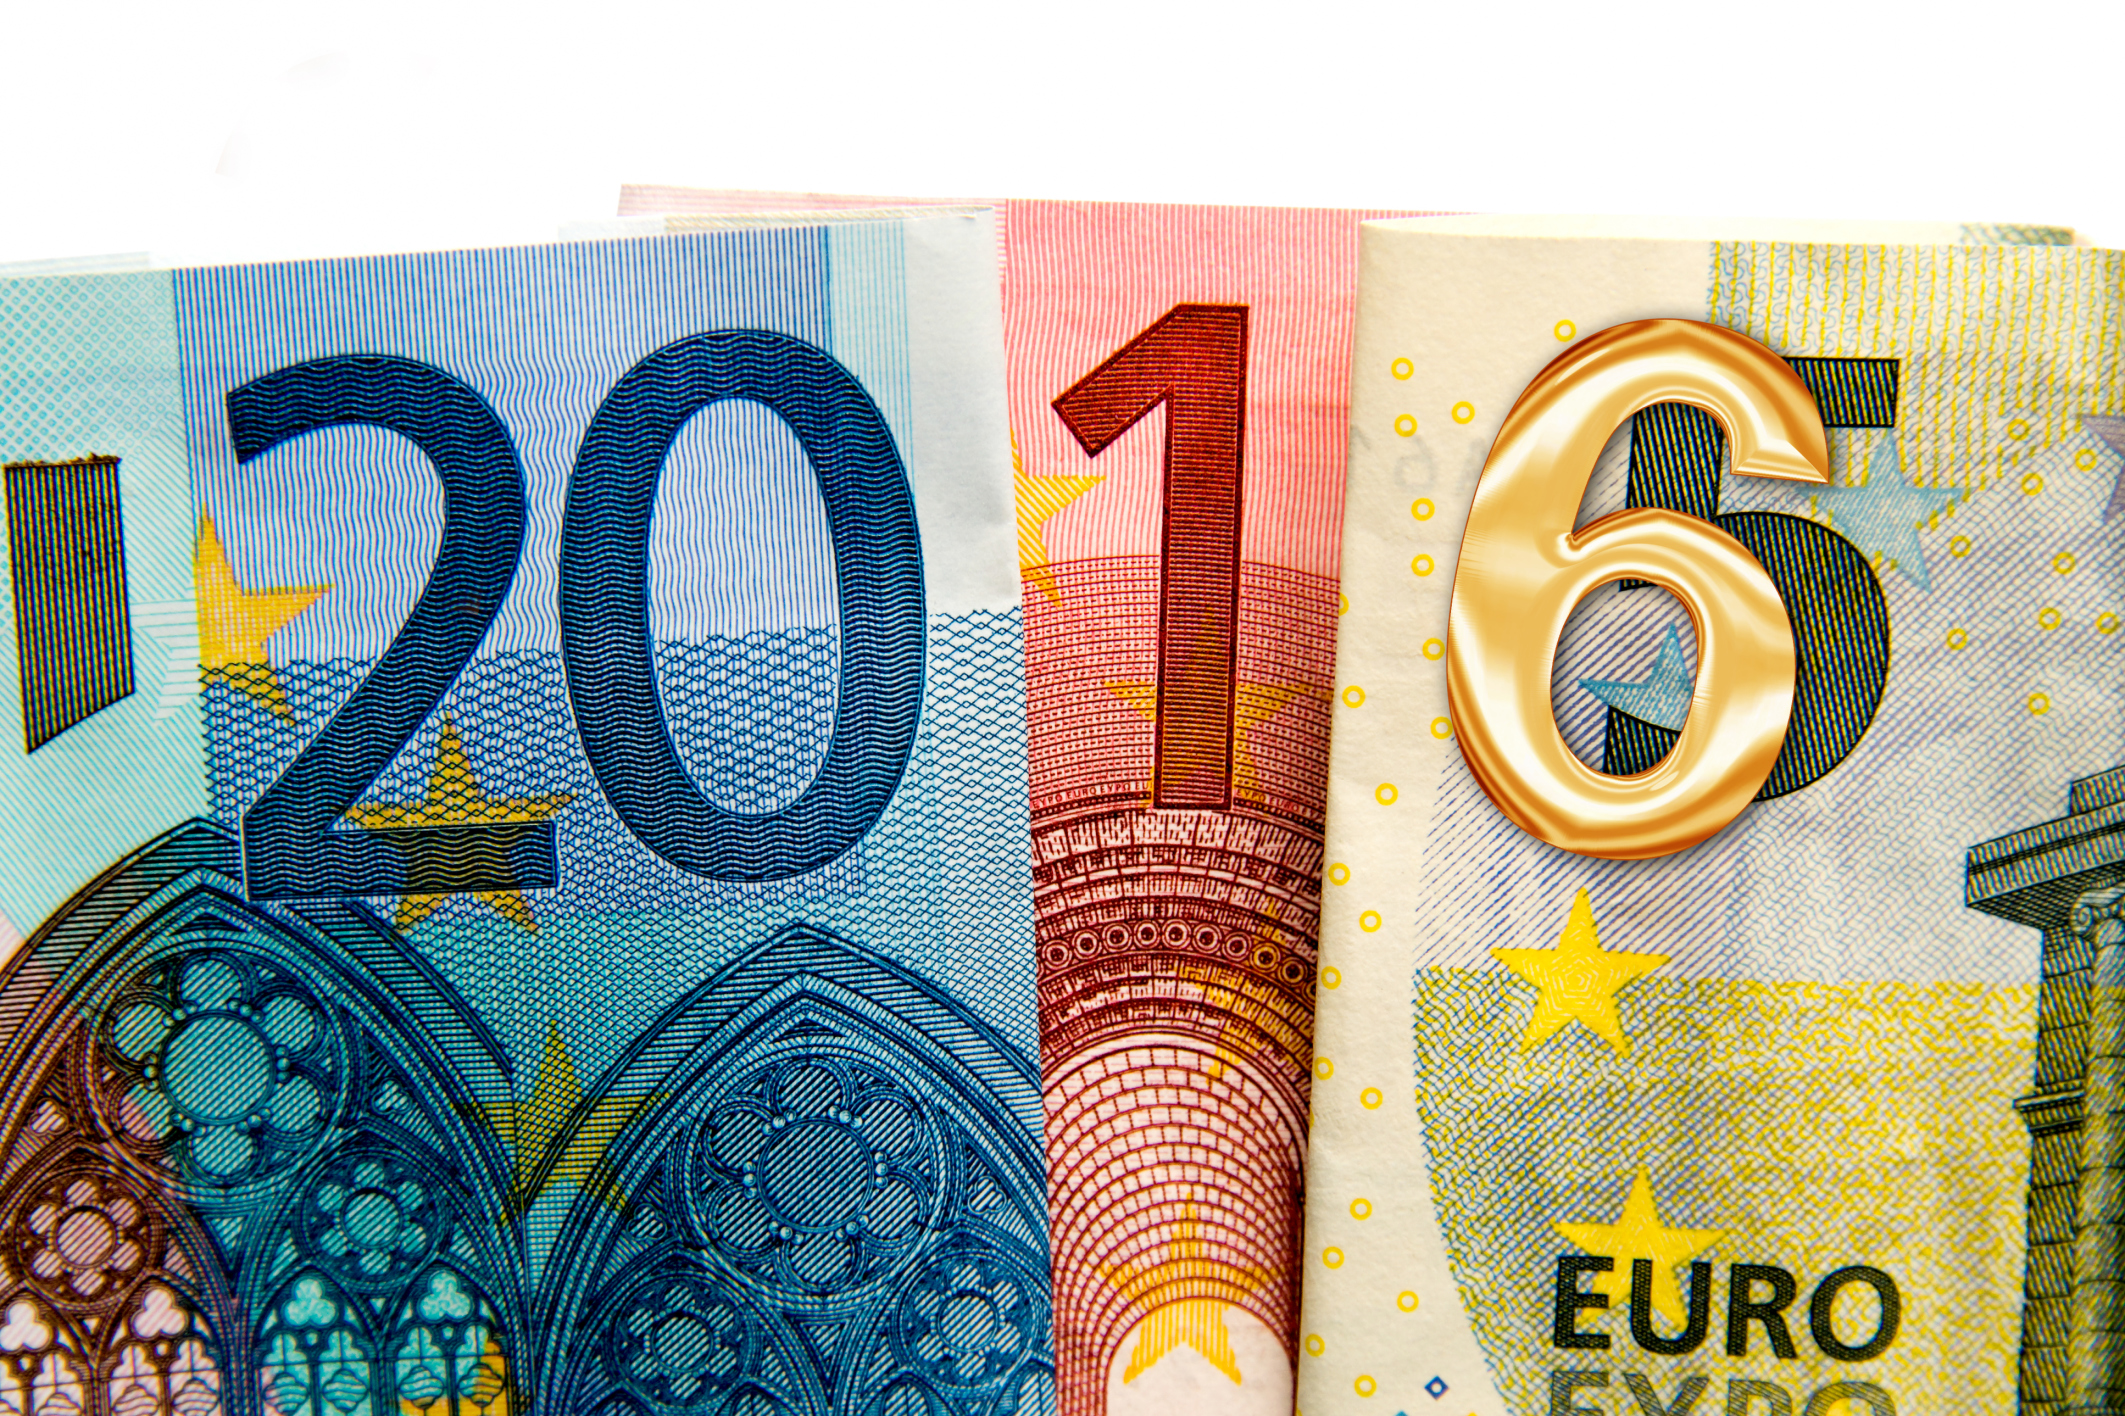 CLose up on 2016 written with euros bank notes